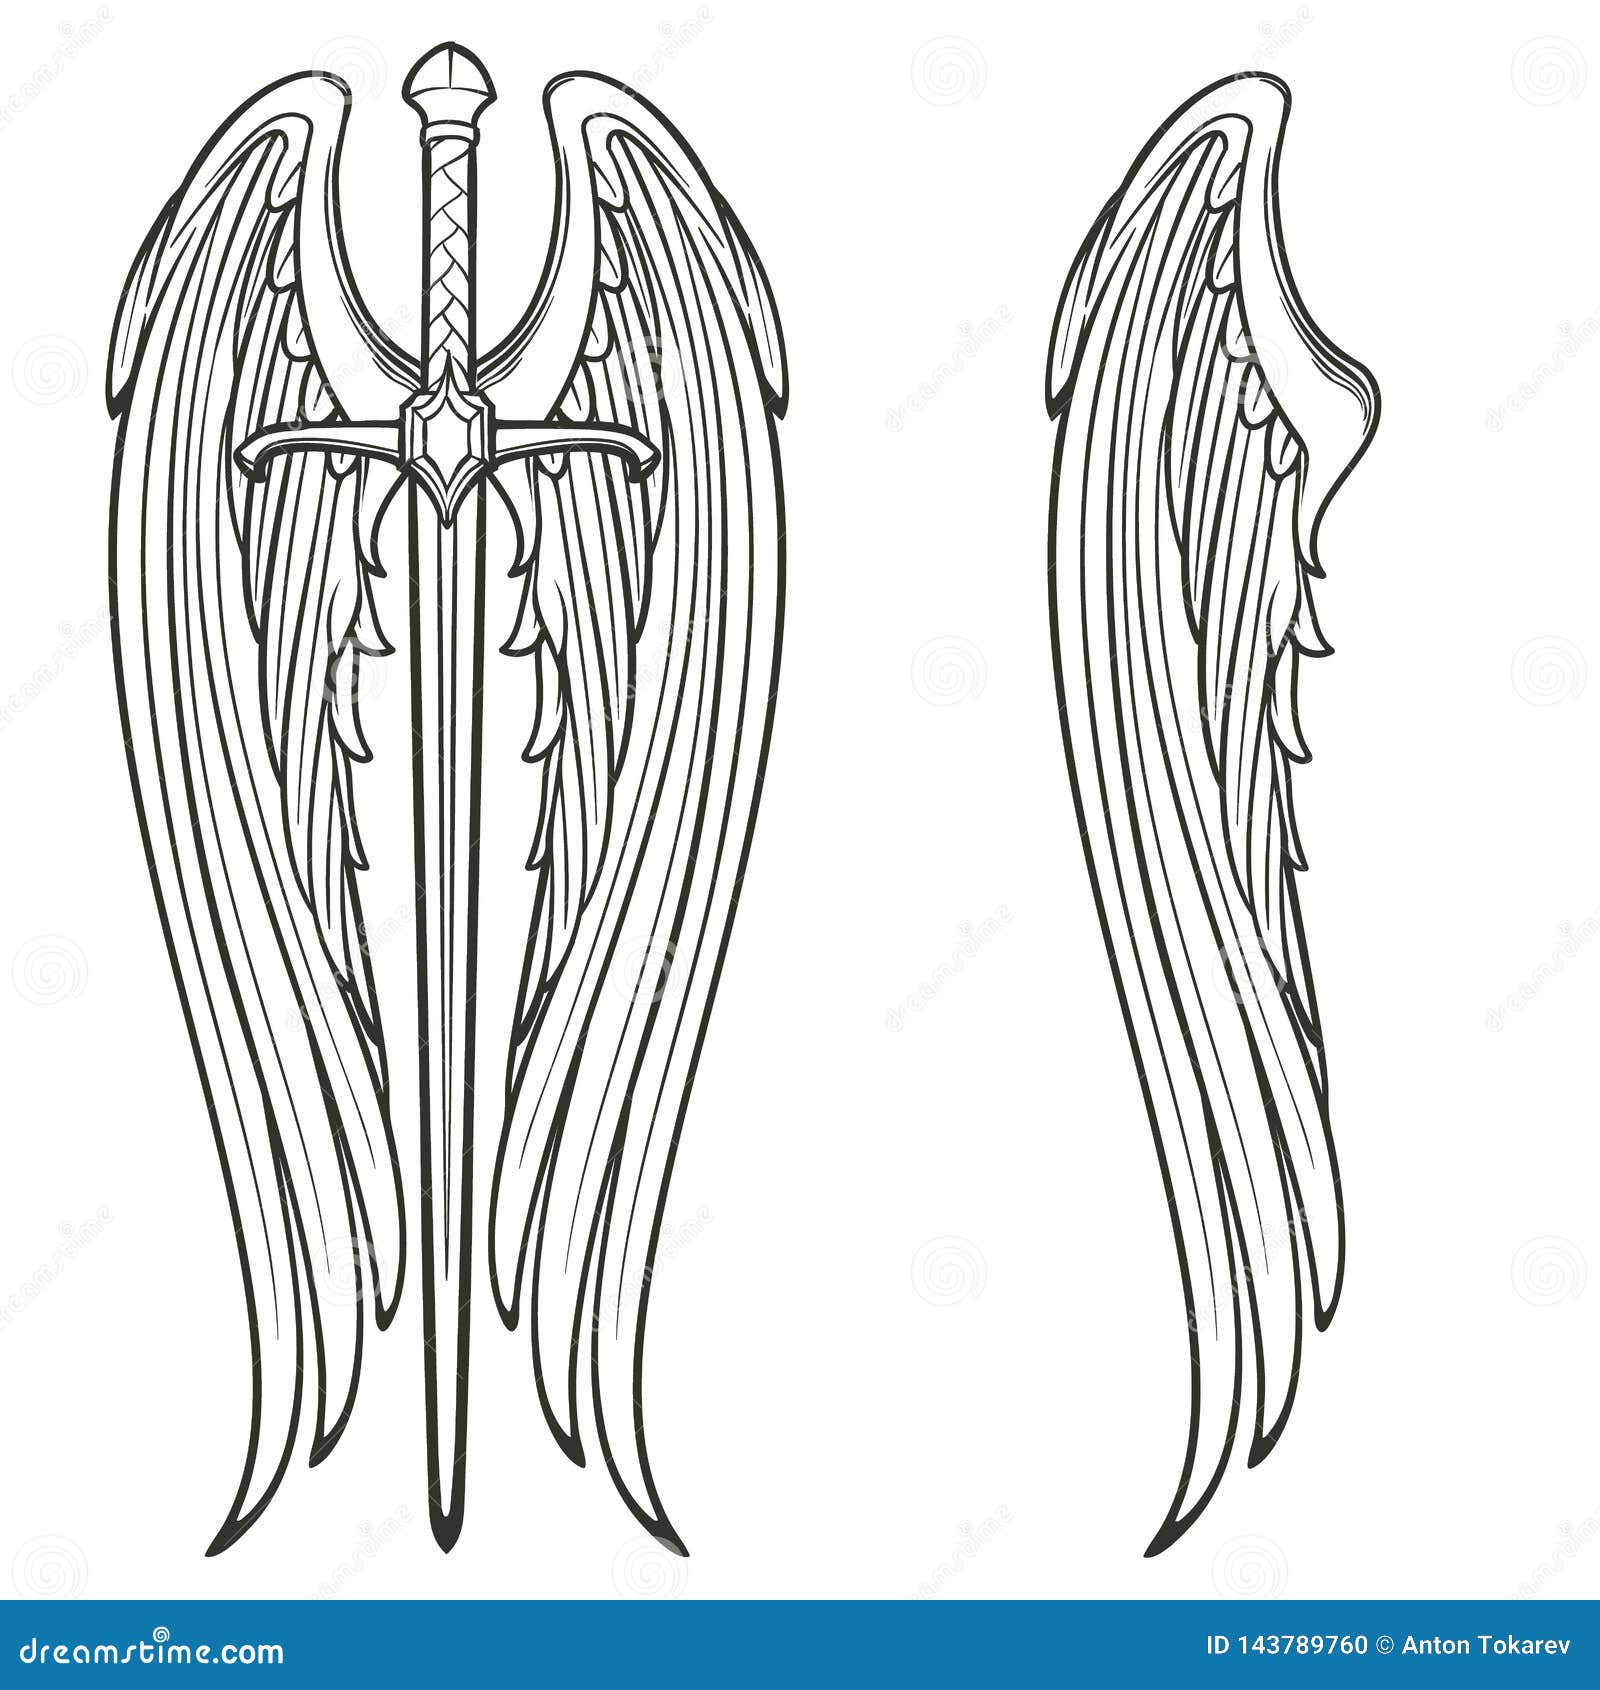 1500 Angel With Sword Stock Photos Pictures  RoyaltyFree Images   iStock  Demon Angel wings